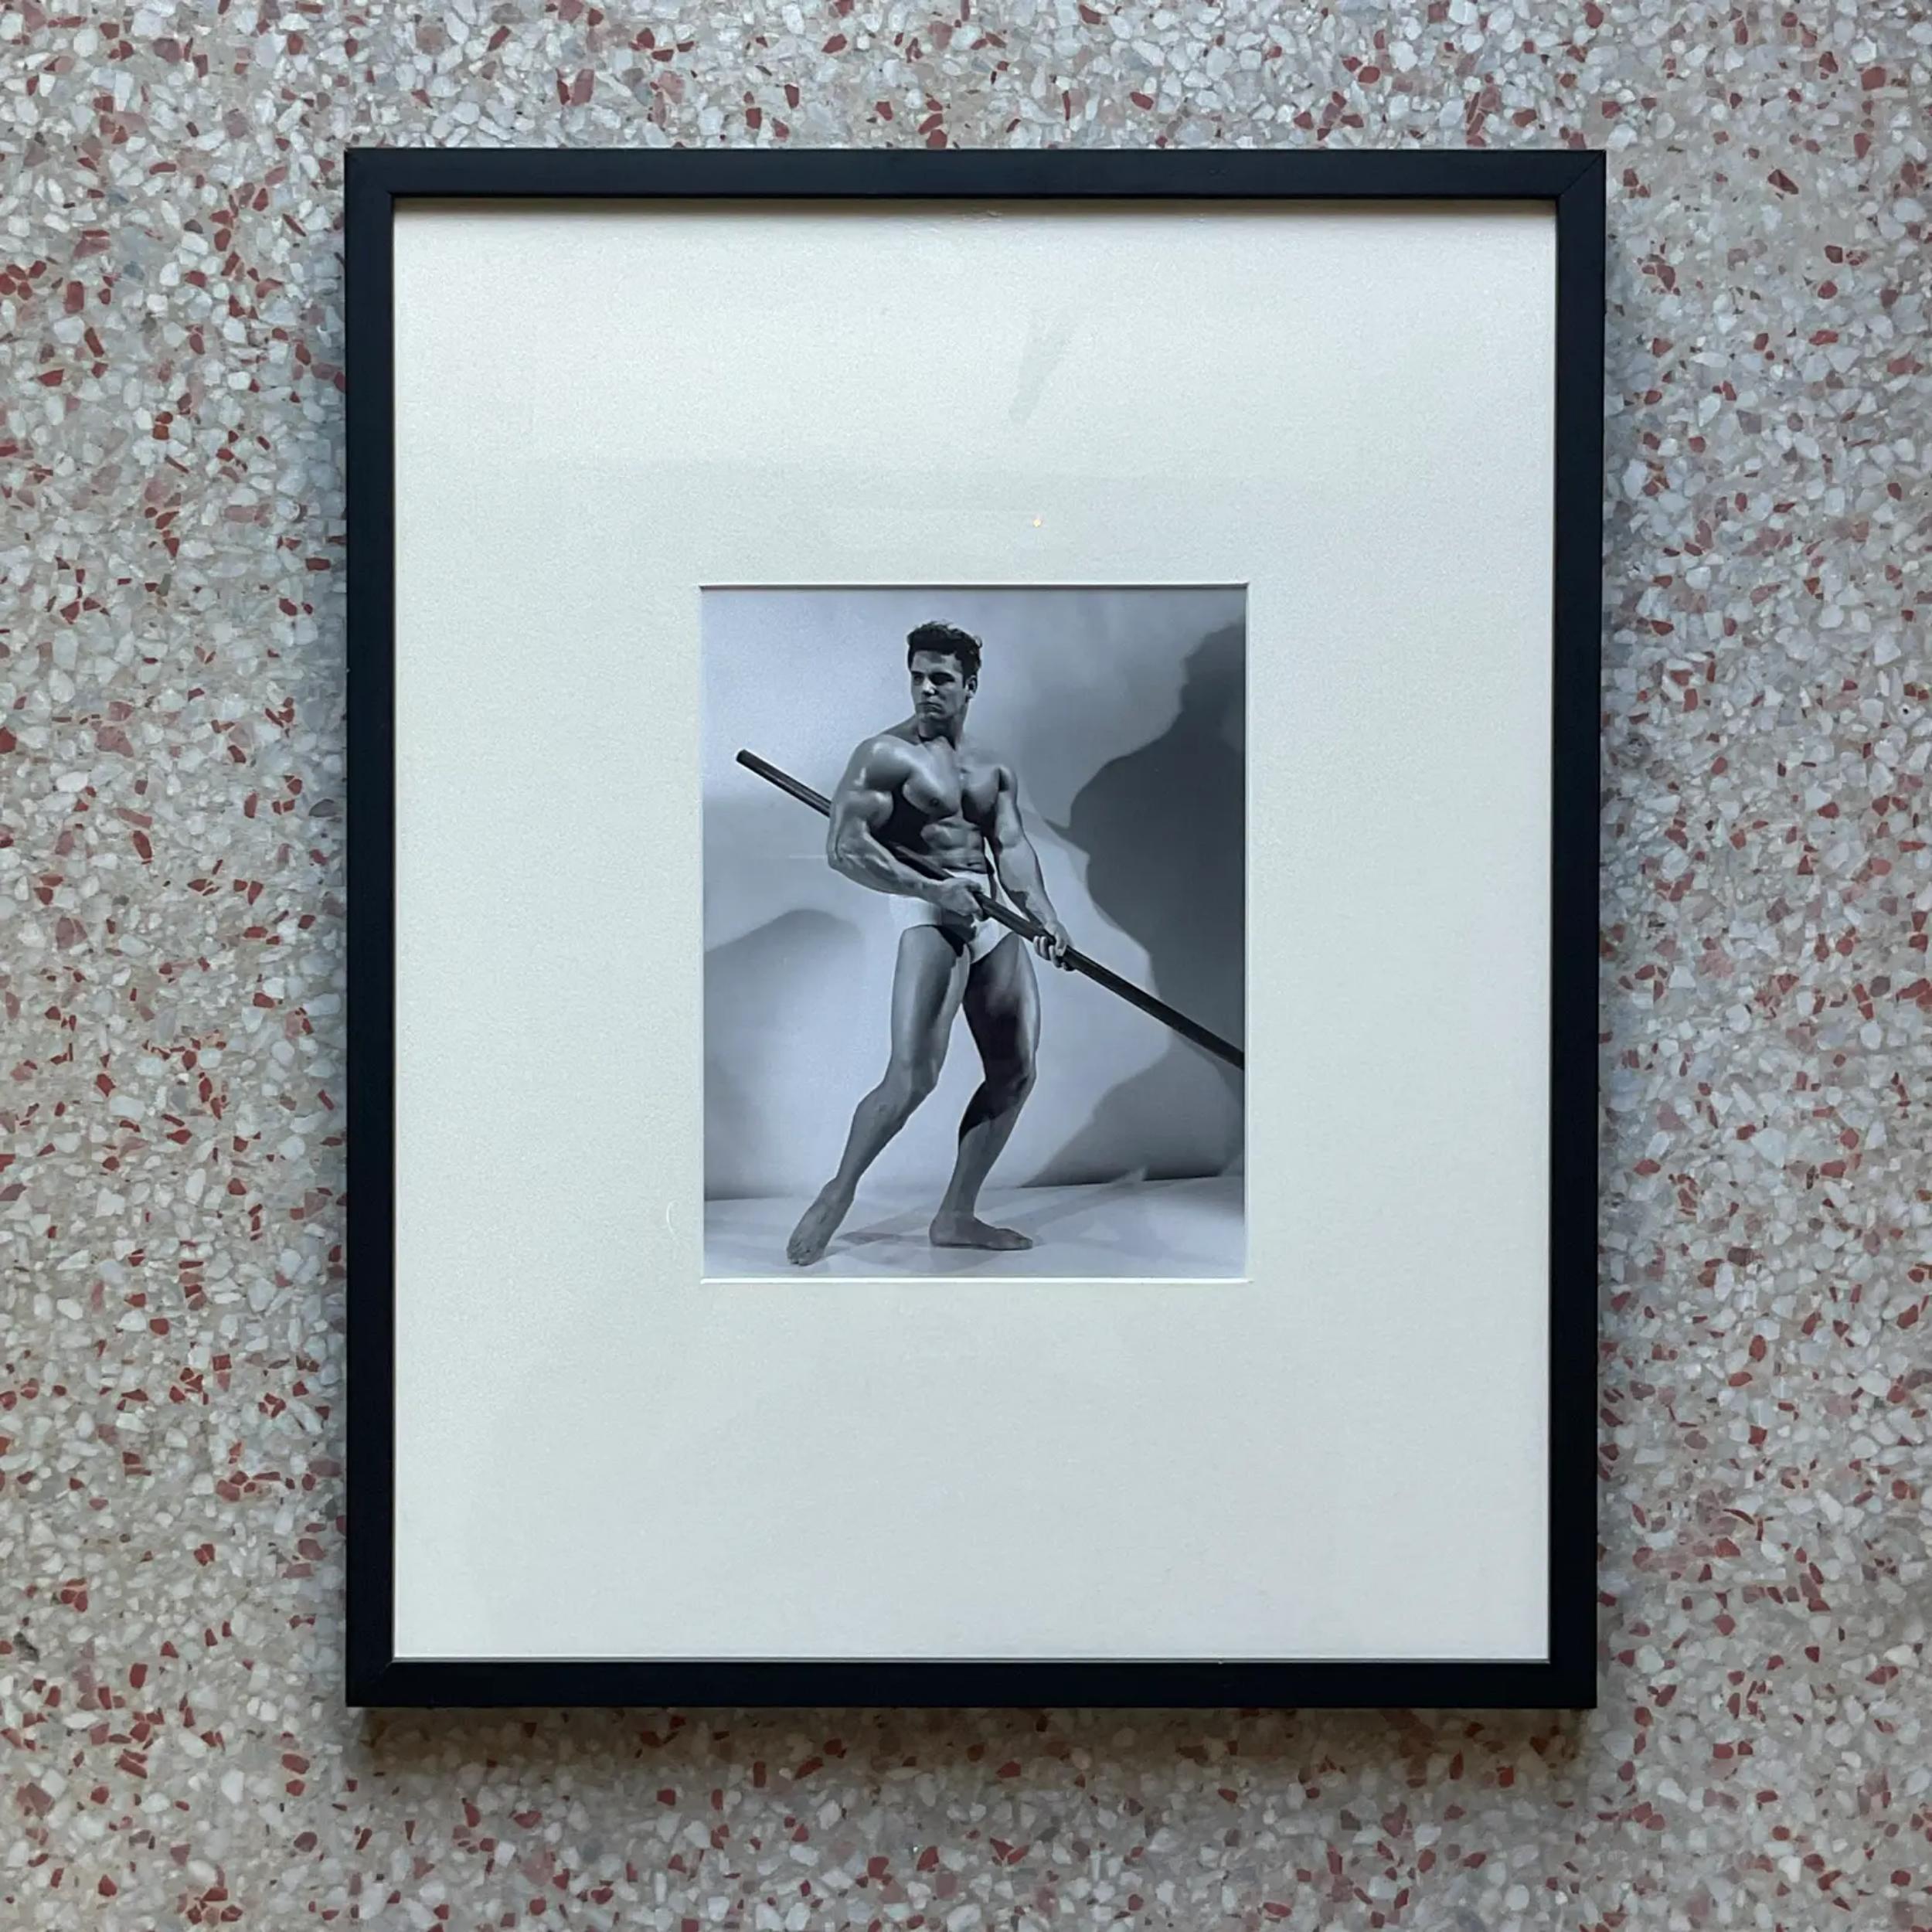 American Mid 20th Century Vintage Bruce of La Framed Photograph of Man With Pole Vaulting For Sale